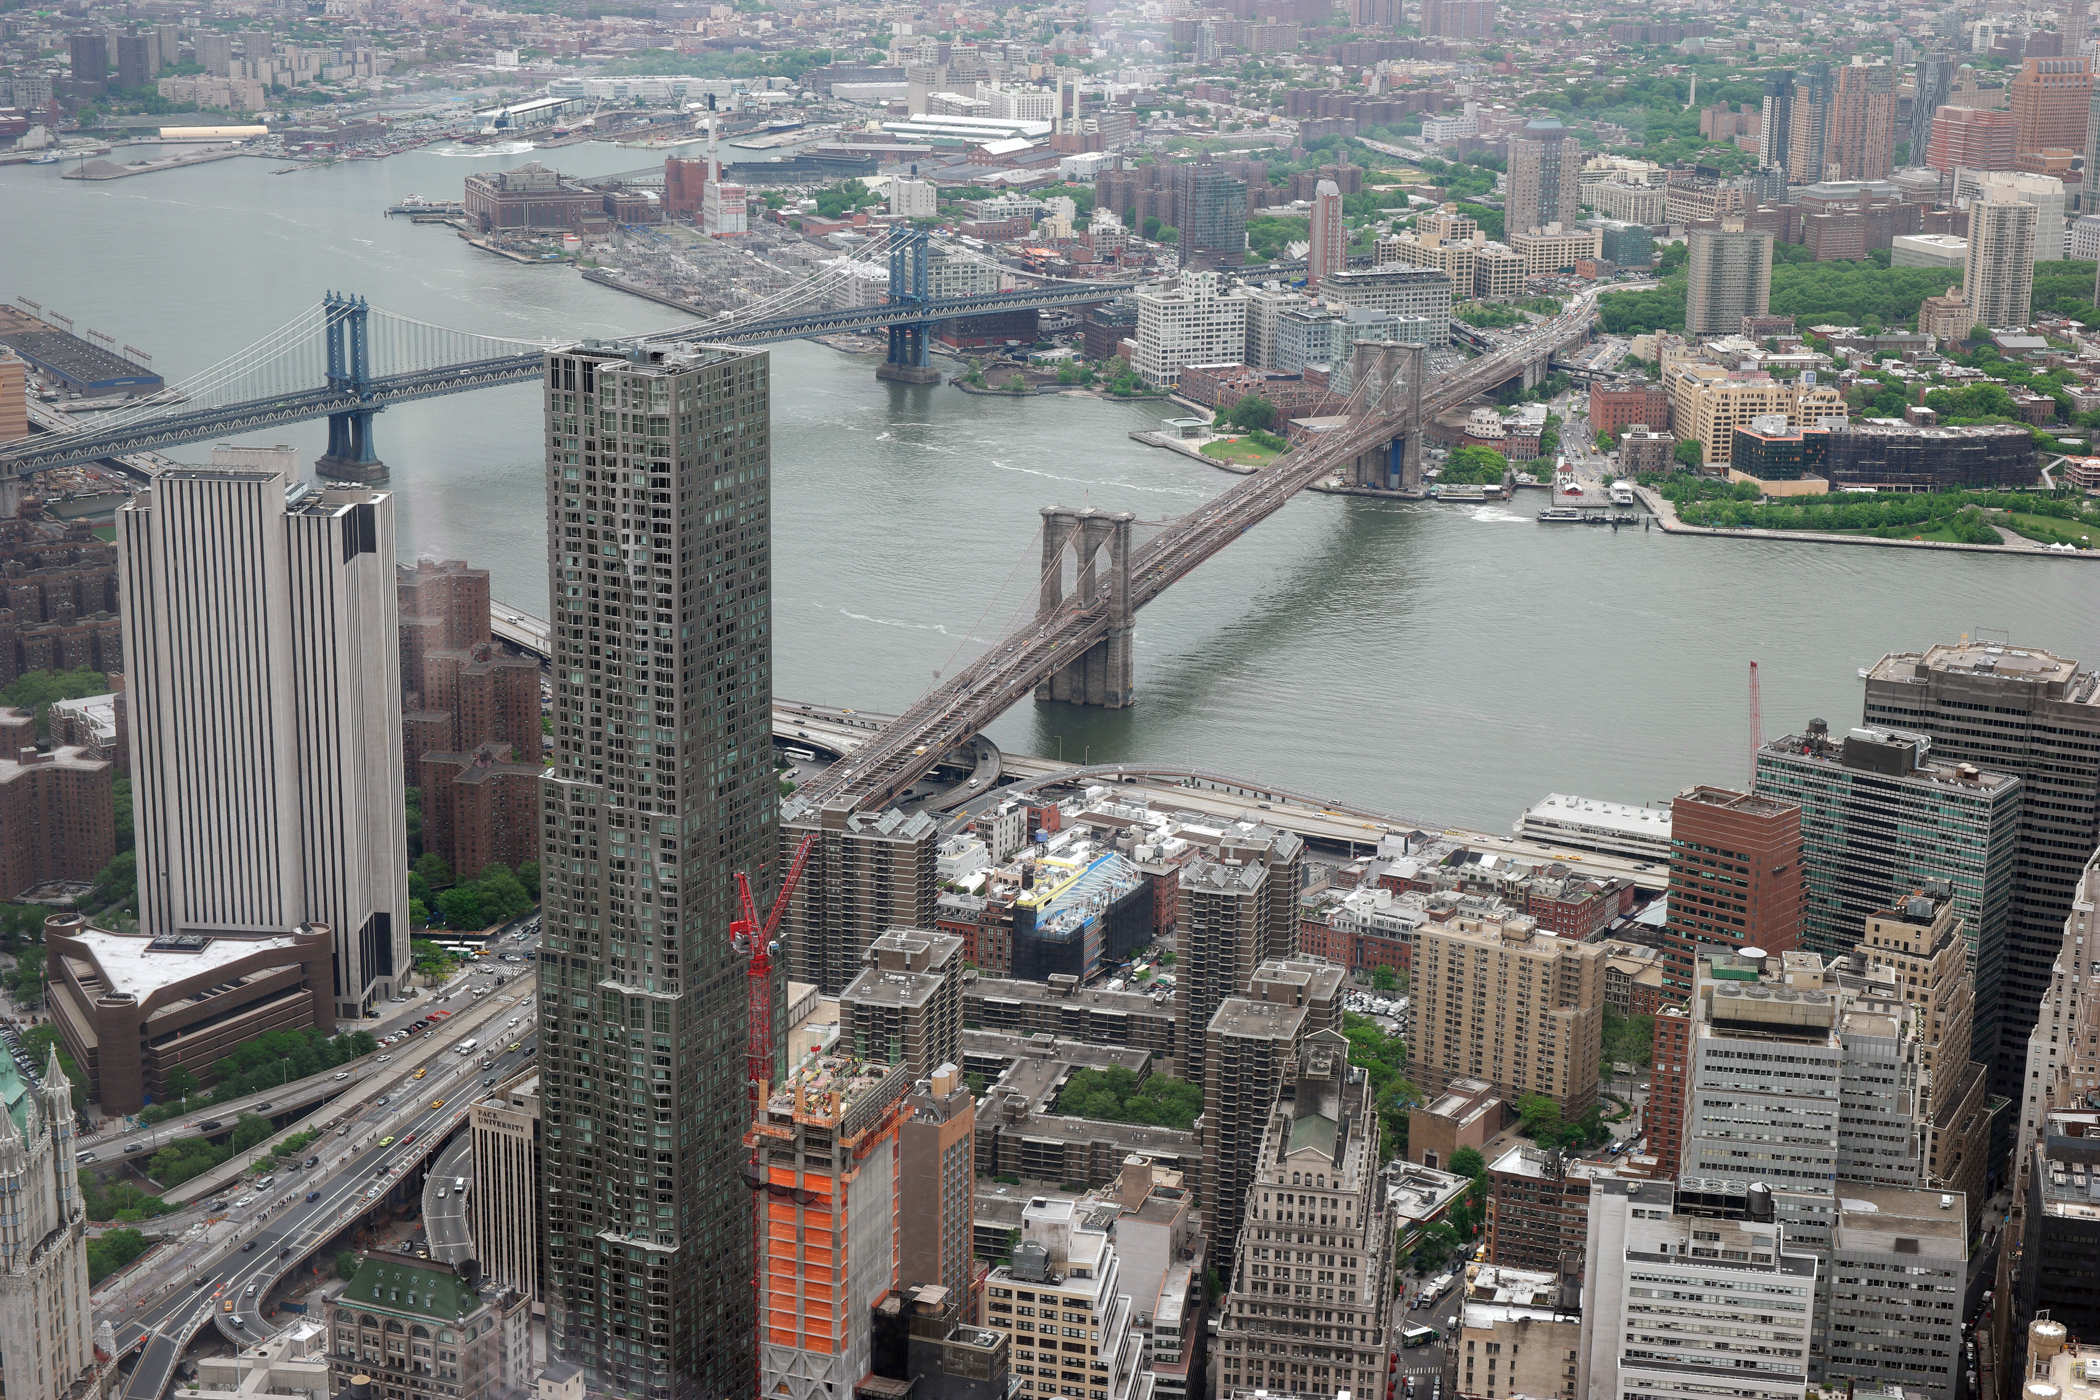 One of the views from the One World Observatory. Downtown Express photo by Milo Hess.